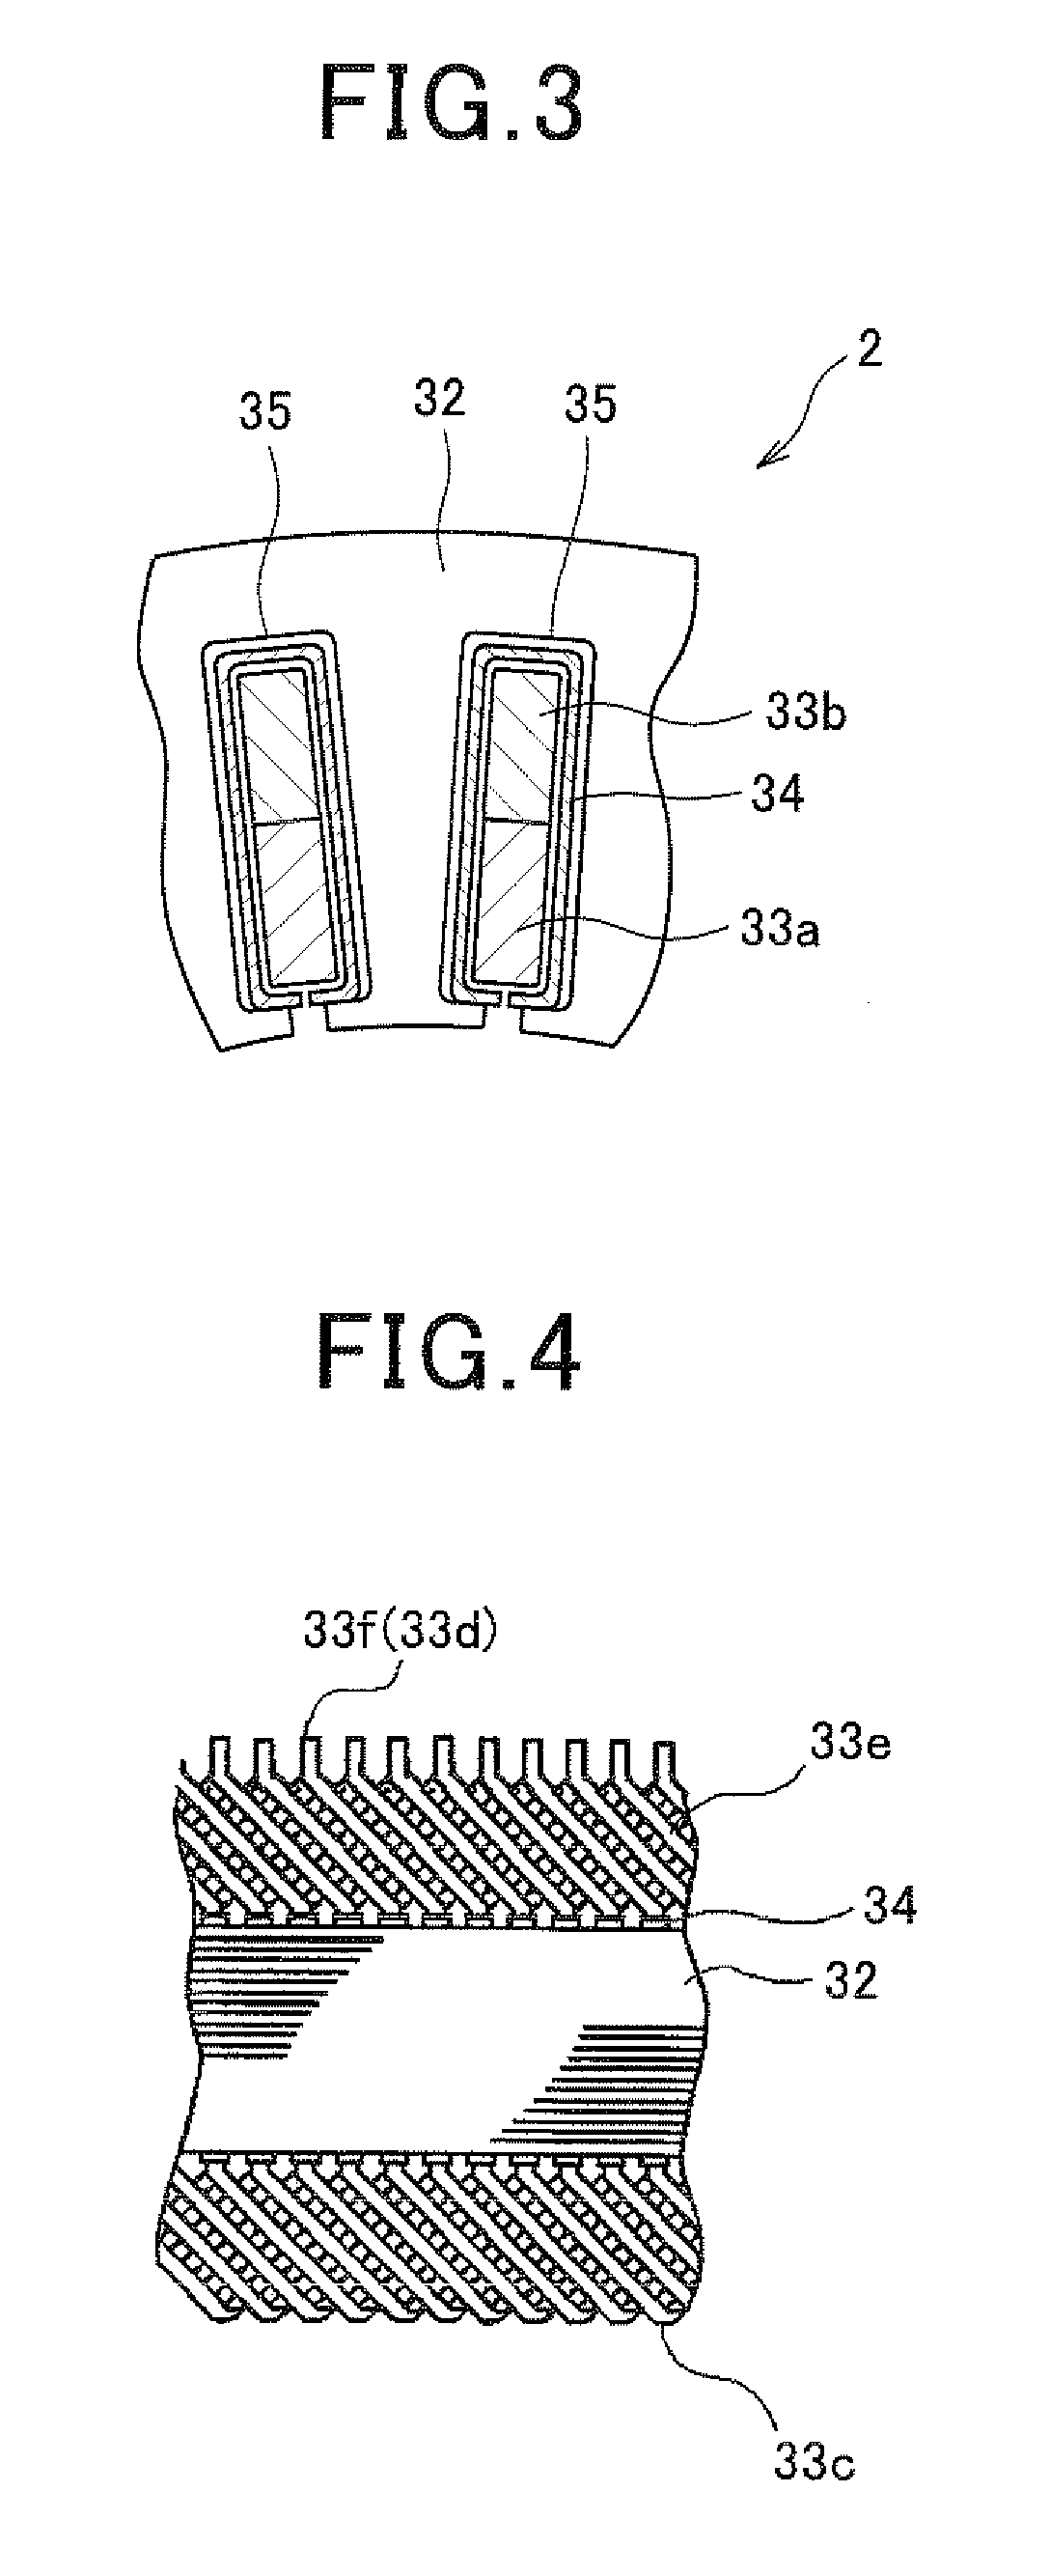 Stator for use in electric rotating machine